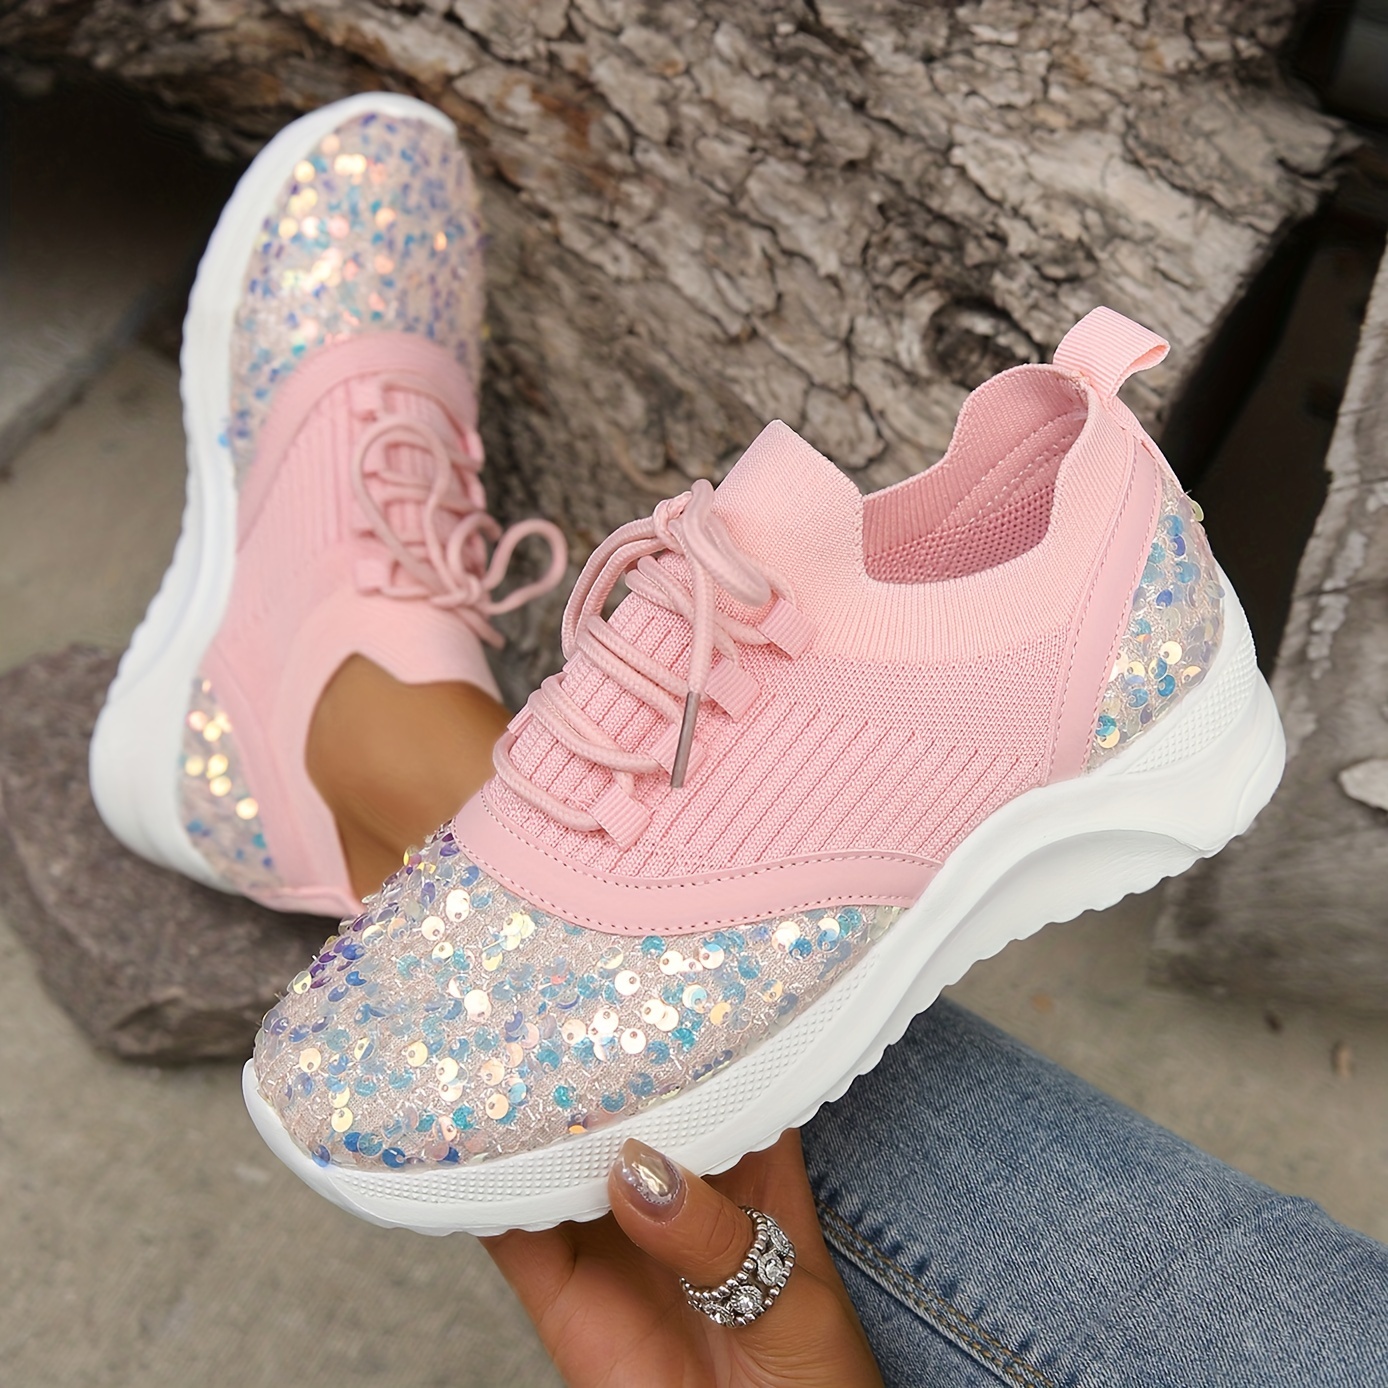 2019 New Basket Femme Sneakers Women Pink Shiny Sequins High Top Casual  Shoes Female Bling Studded Trainers Women Travel Shoes